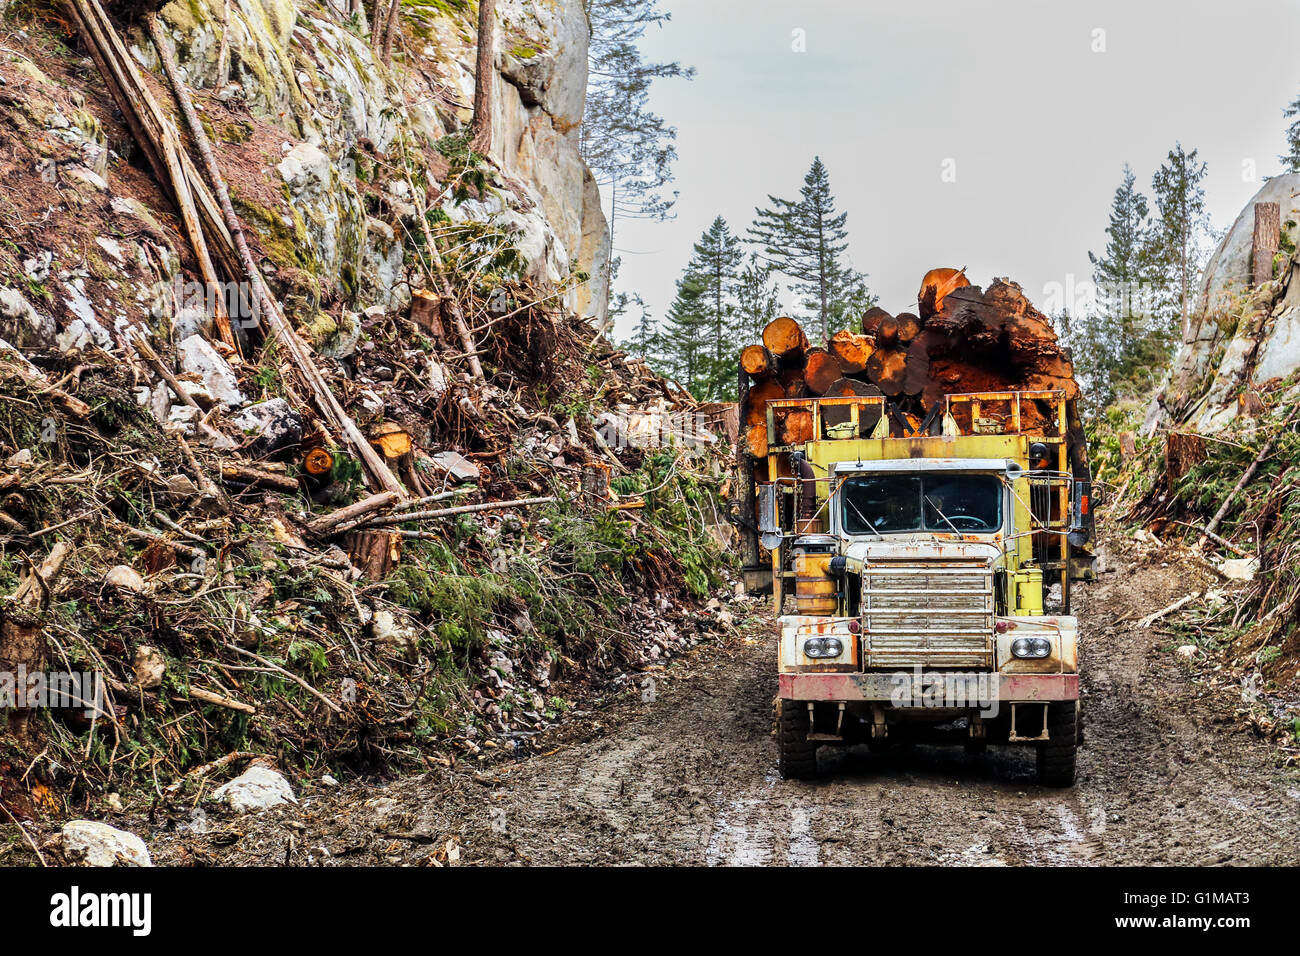 Loaded logging truck on forest road Stock Photo